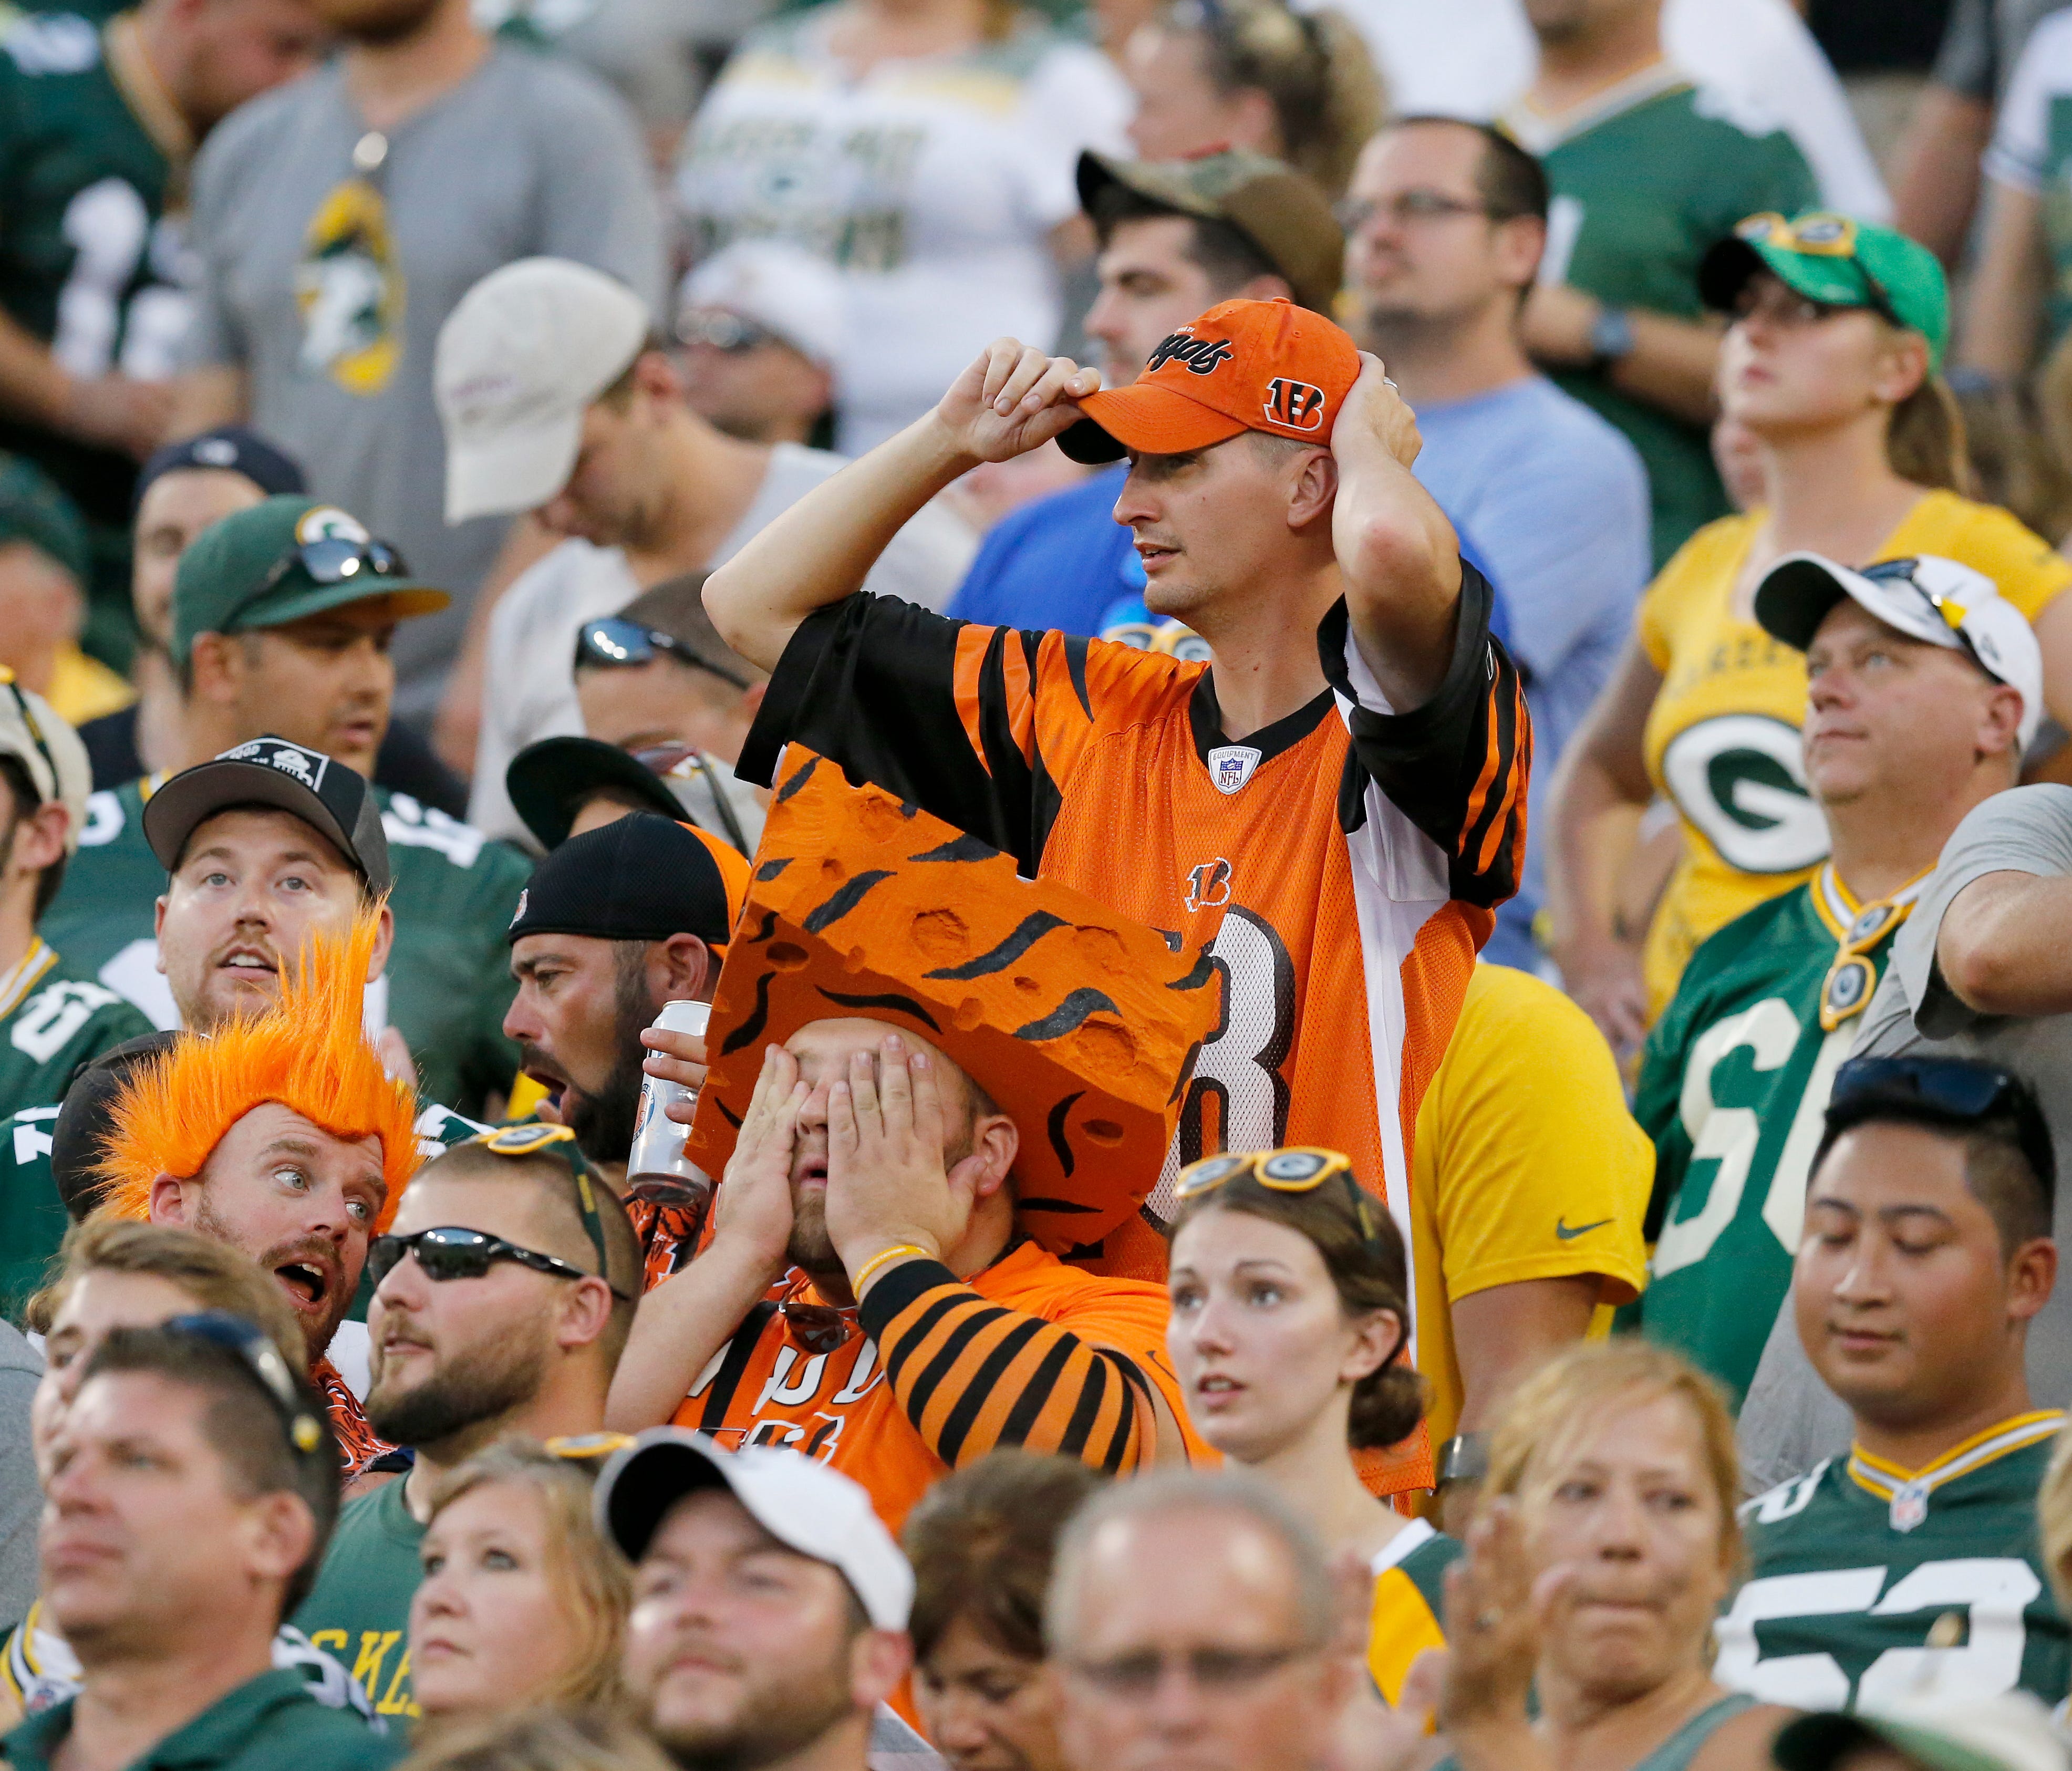 A pair of Bengals fans react as the Bengals fail to score on their possession in overtime of the NFL Week 3 game between the Green Bay Packers and the Cincinnati Bengals at Lambeau Field in Green Bay on Sunday, Sept. 24, 2017. The Bengals were droppe